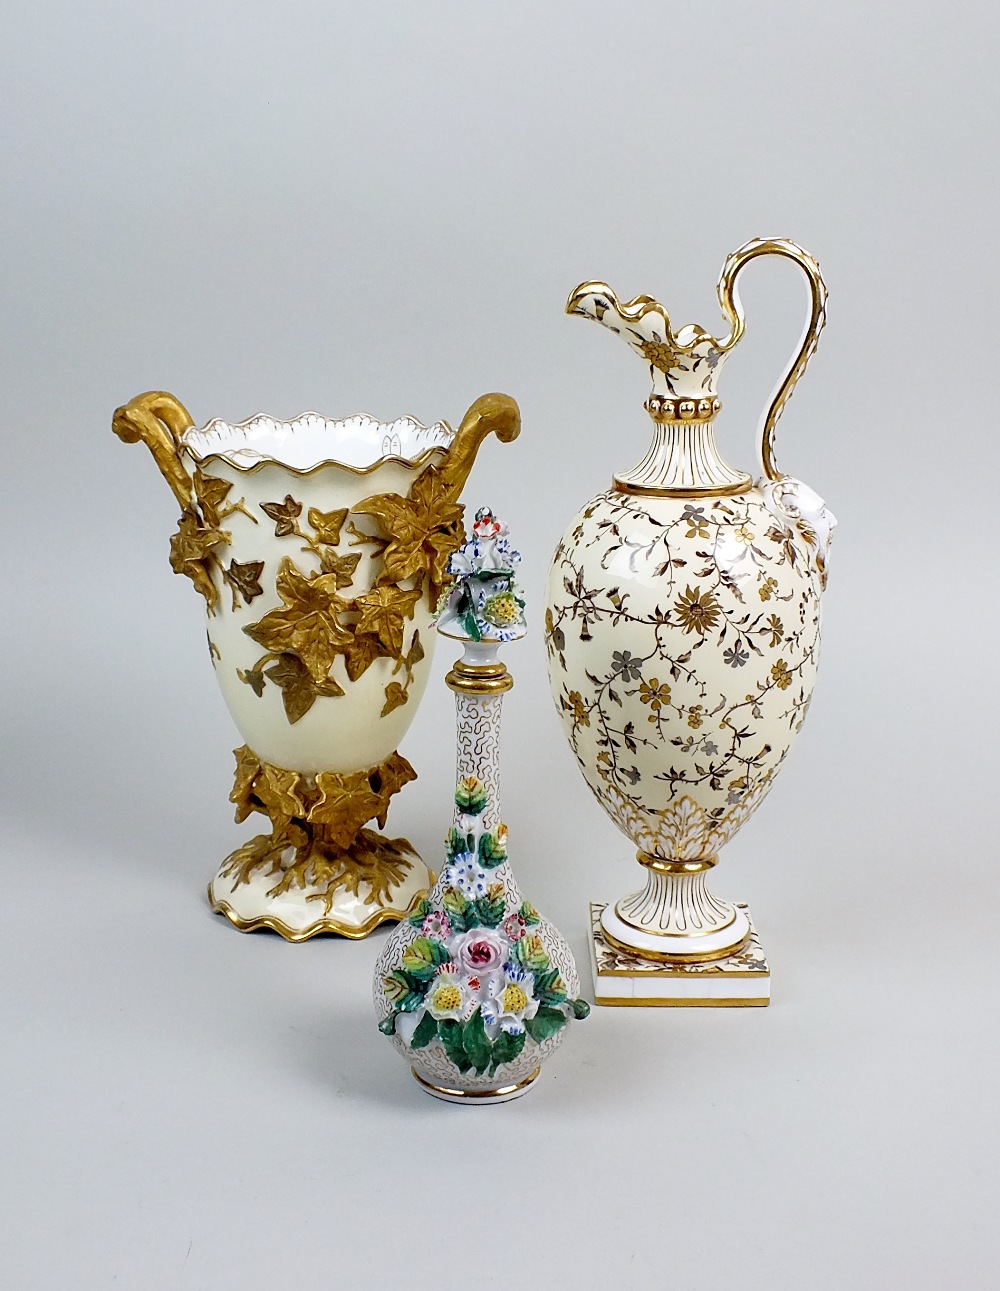 A Mintons porcelain ewer, late 19th century,